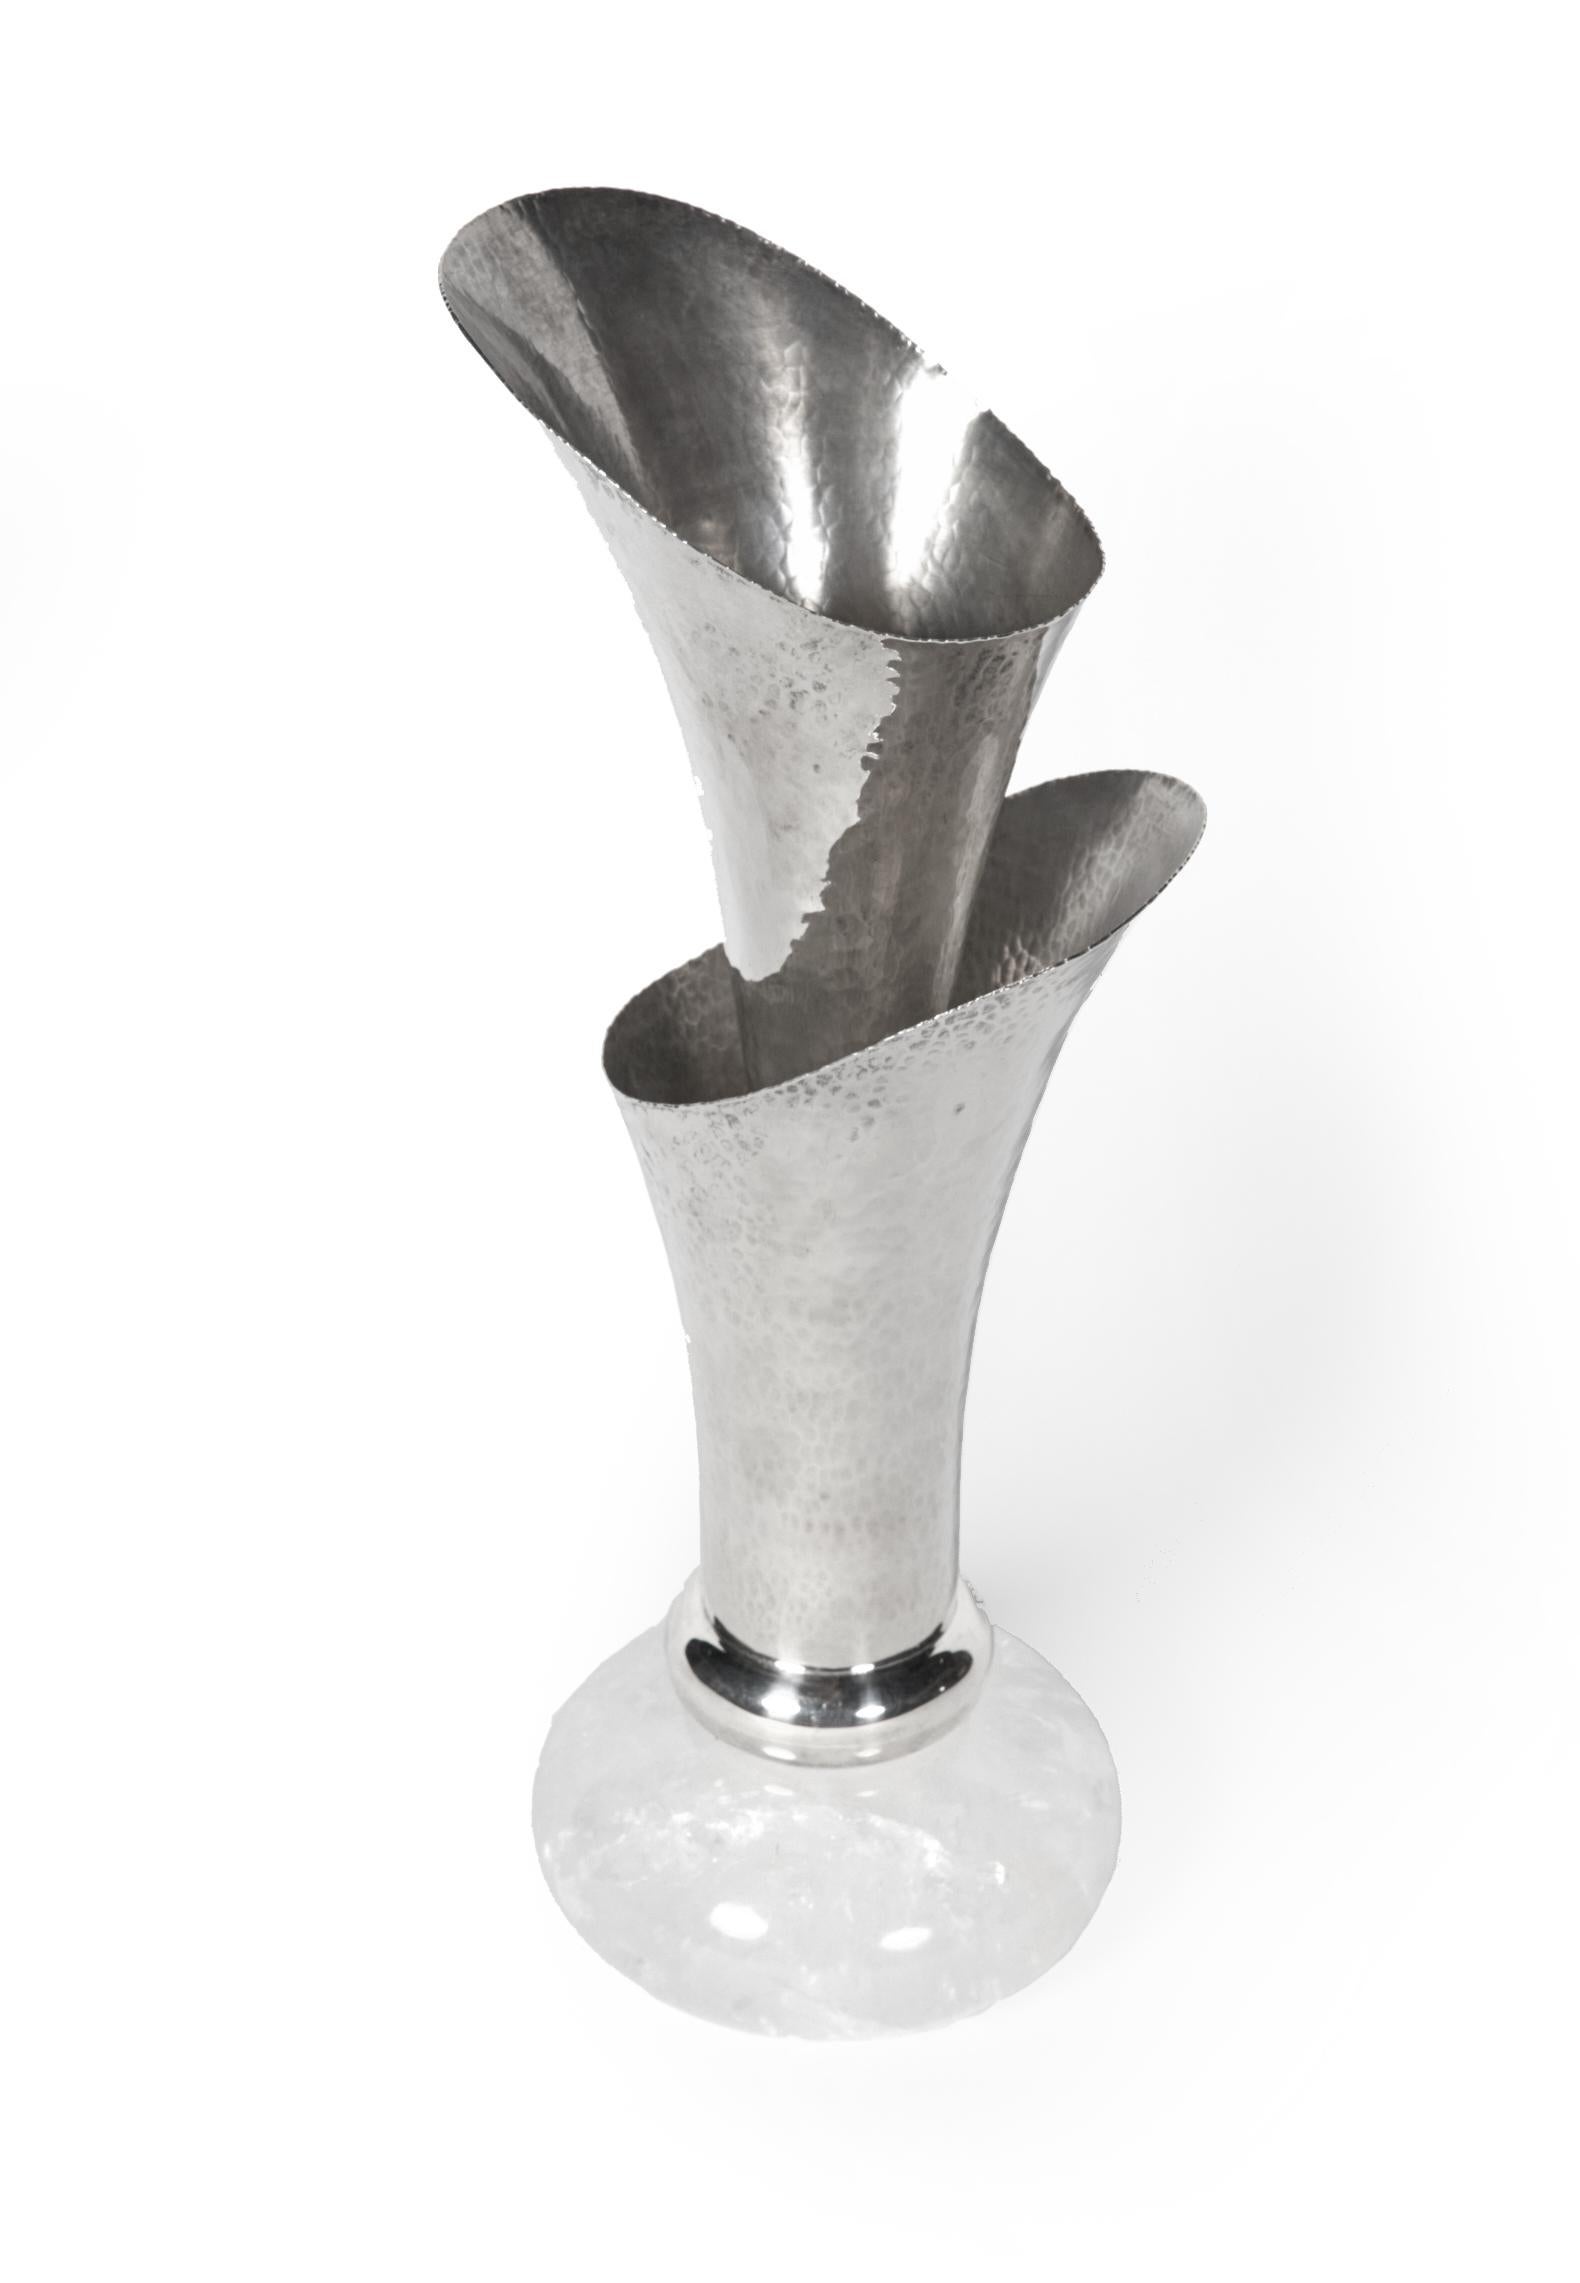 Rare and elegant this double vase by Ravissant of India is stunning. The 2 piece hammered sterling silver vase is comprised of 2 fluted cones, one inside the other. The inner cone can be removed for a single vase. The base is a silky smooth round